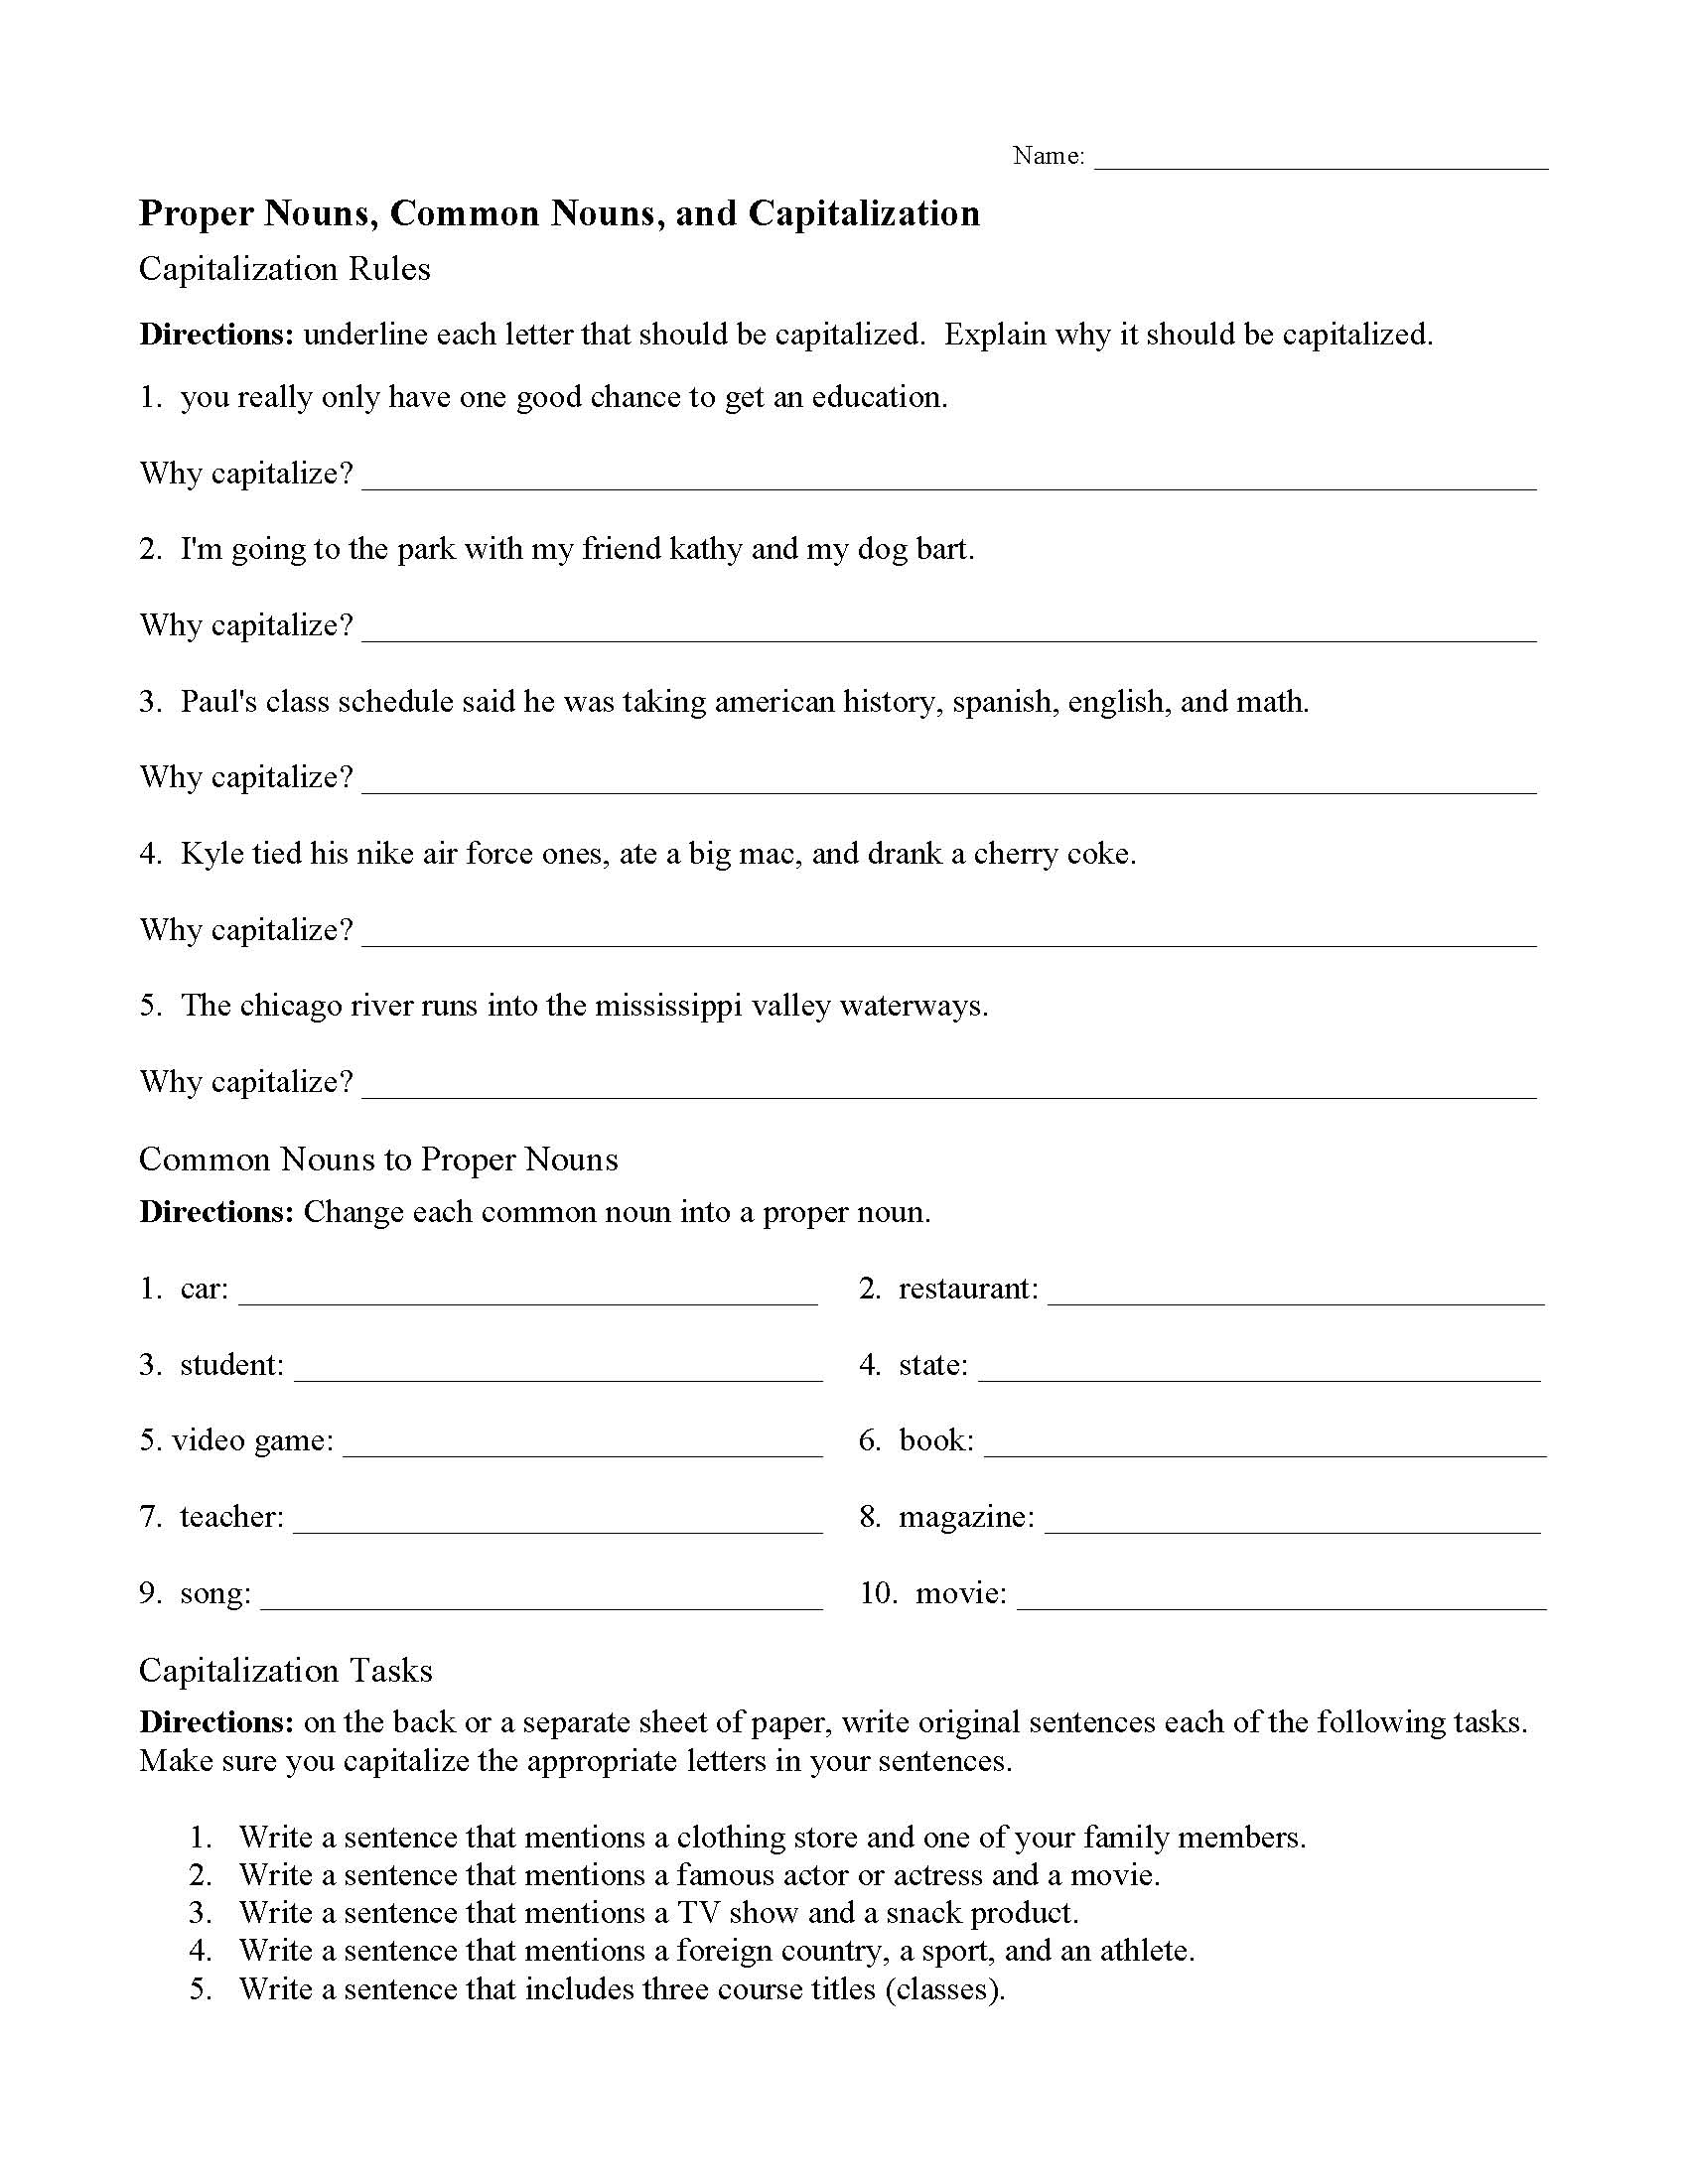 common-and-proper-nouns-and-capitalization-worksheet-1-preview